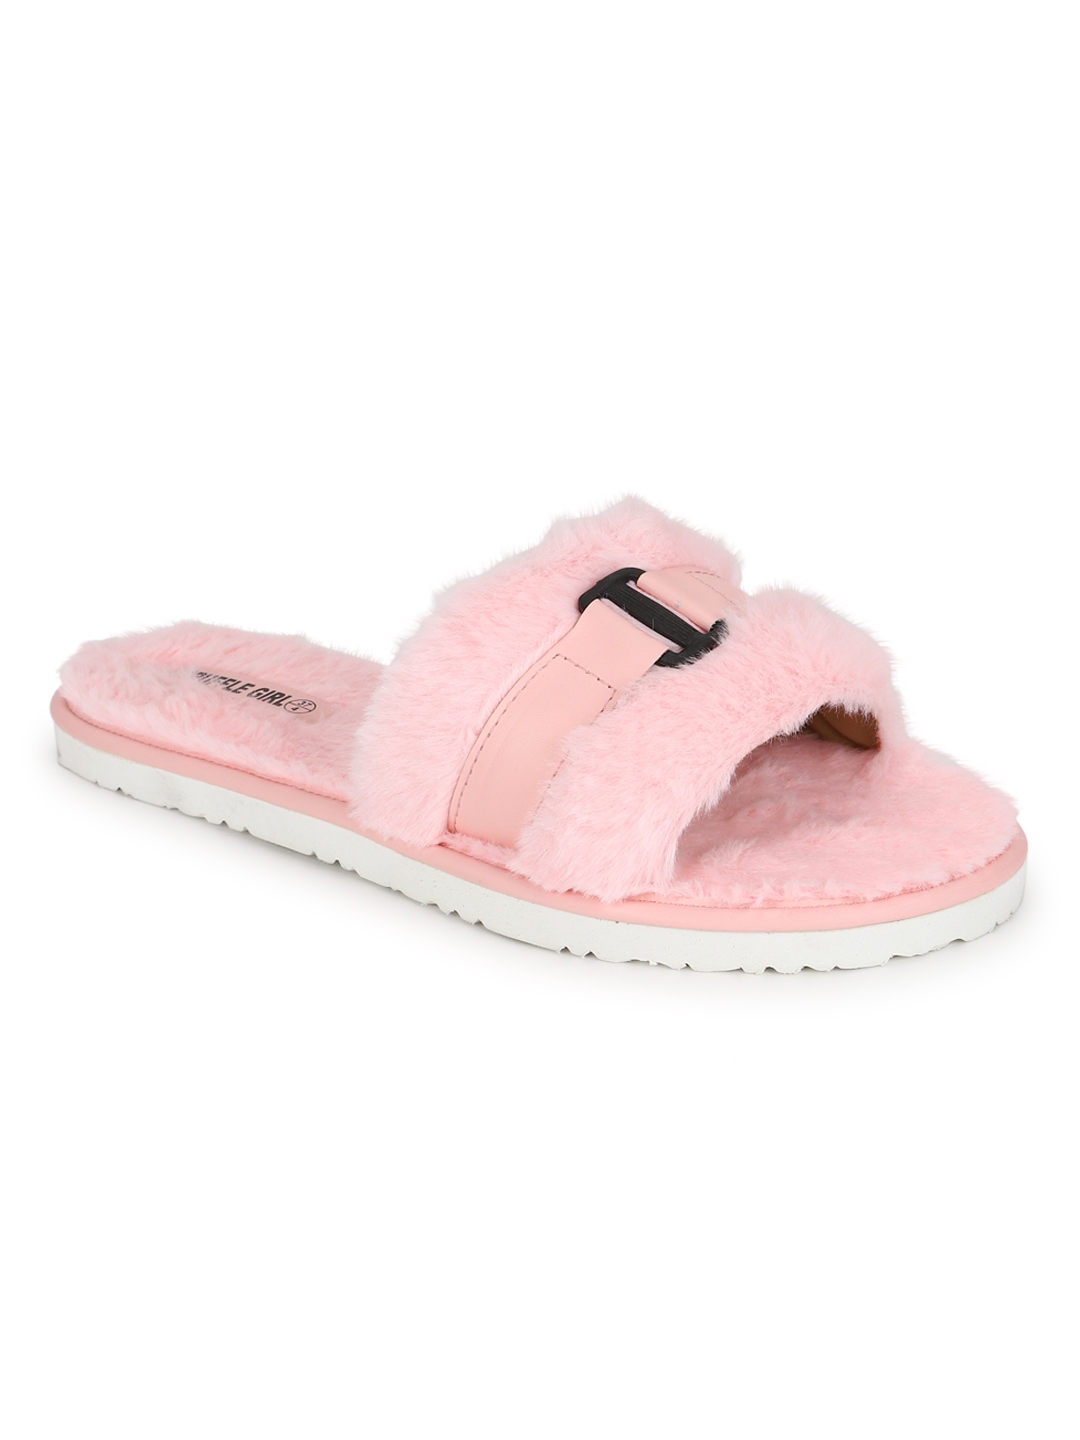 Pink Fuzzy Fur Slip Ons With Buckle